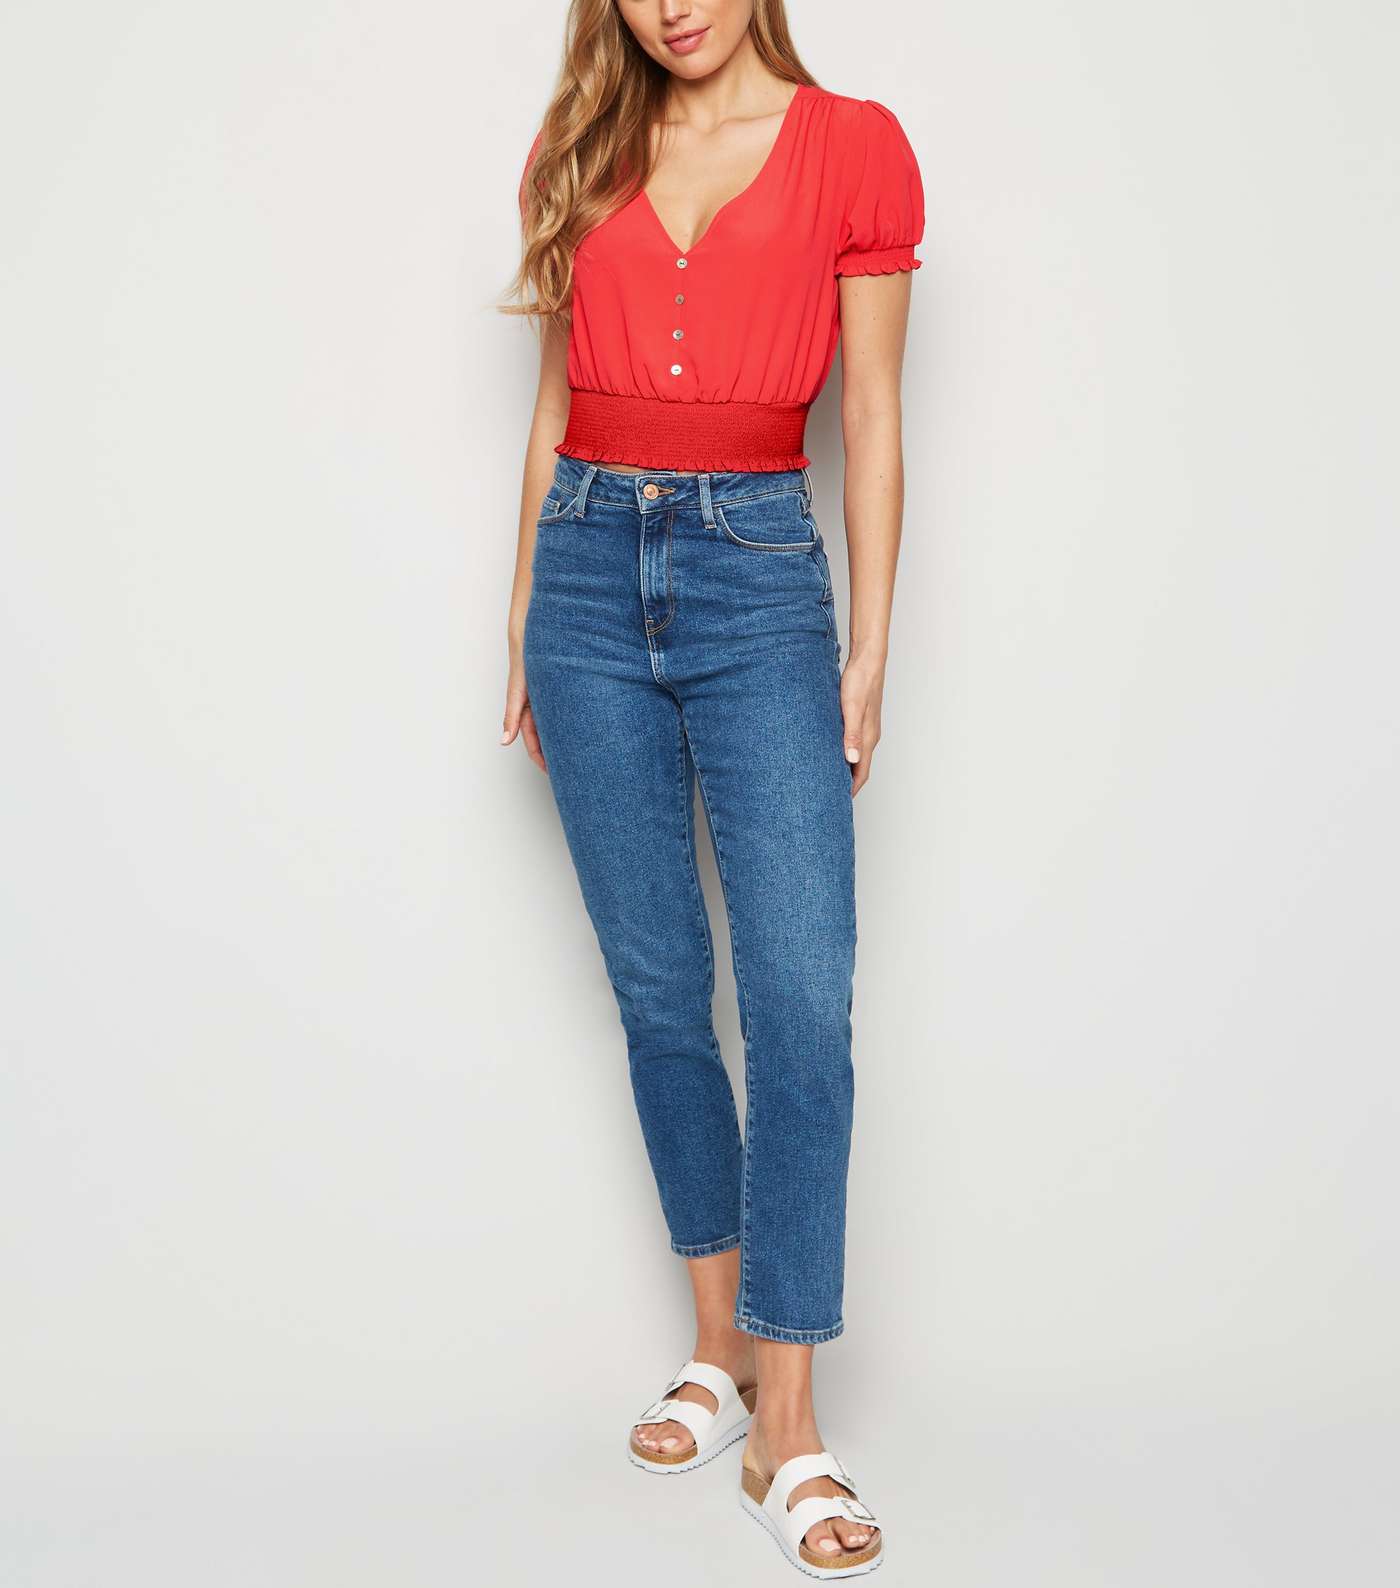 Red Shirred Waist Button Up Blouse Image 2